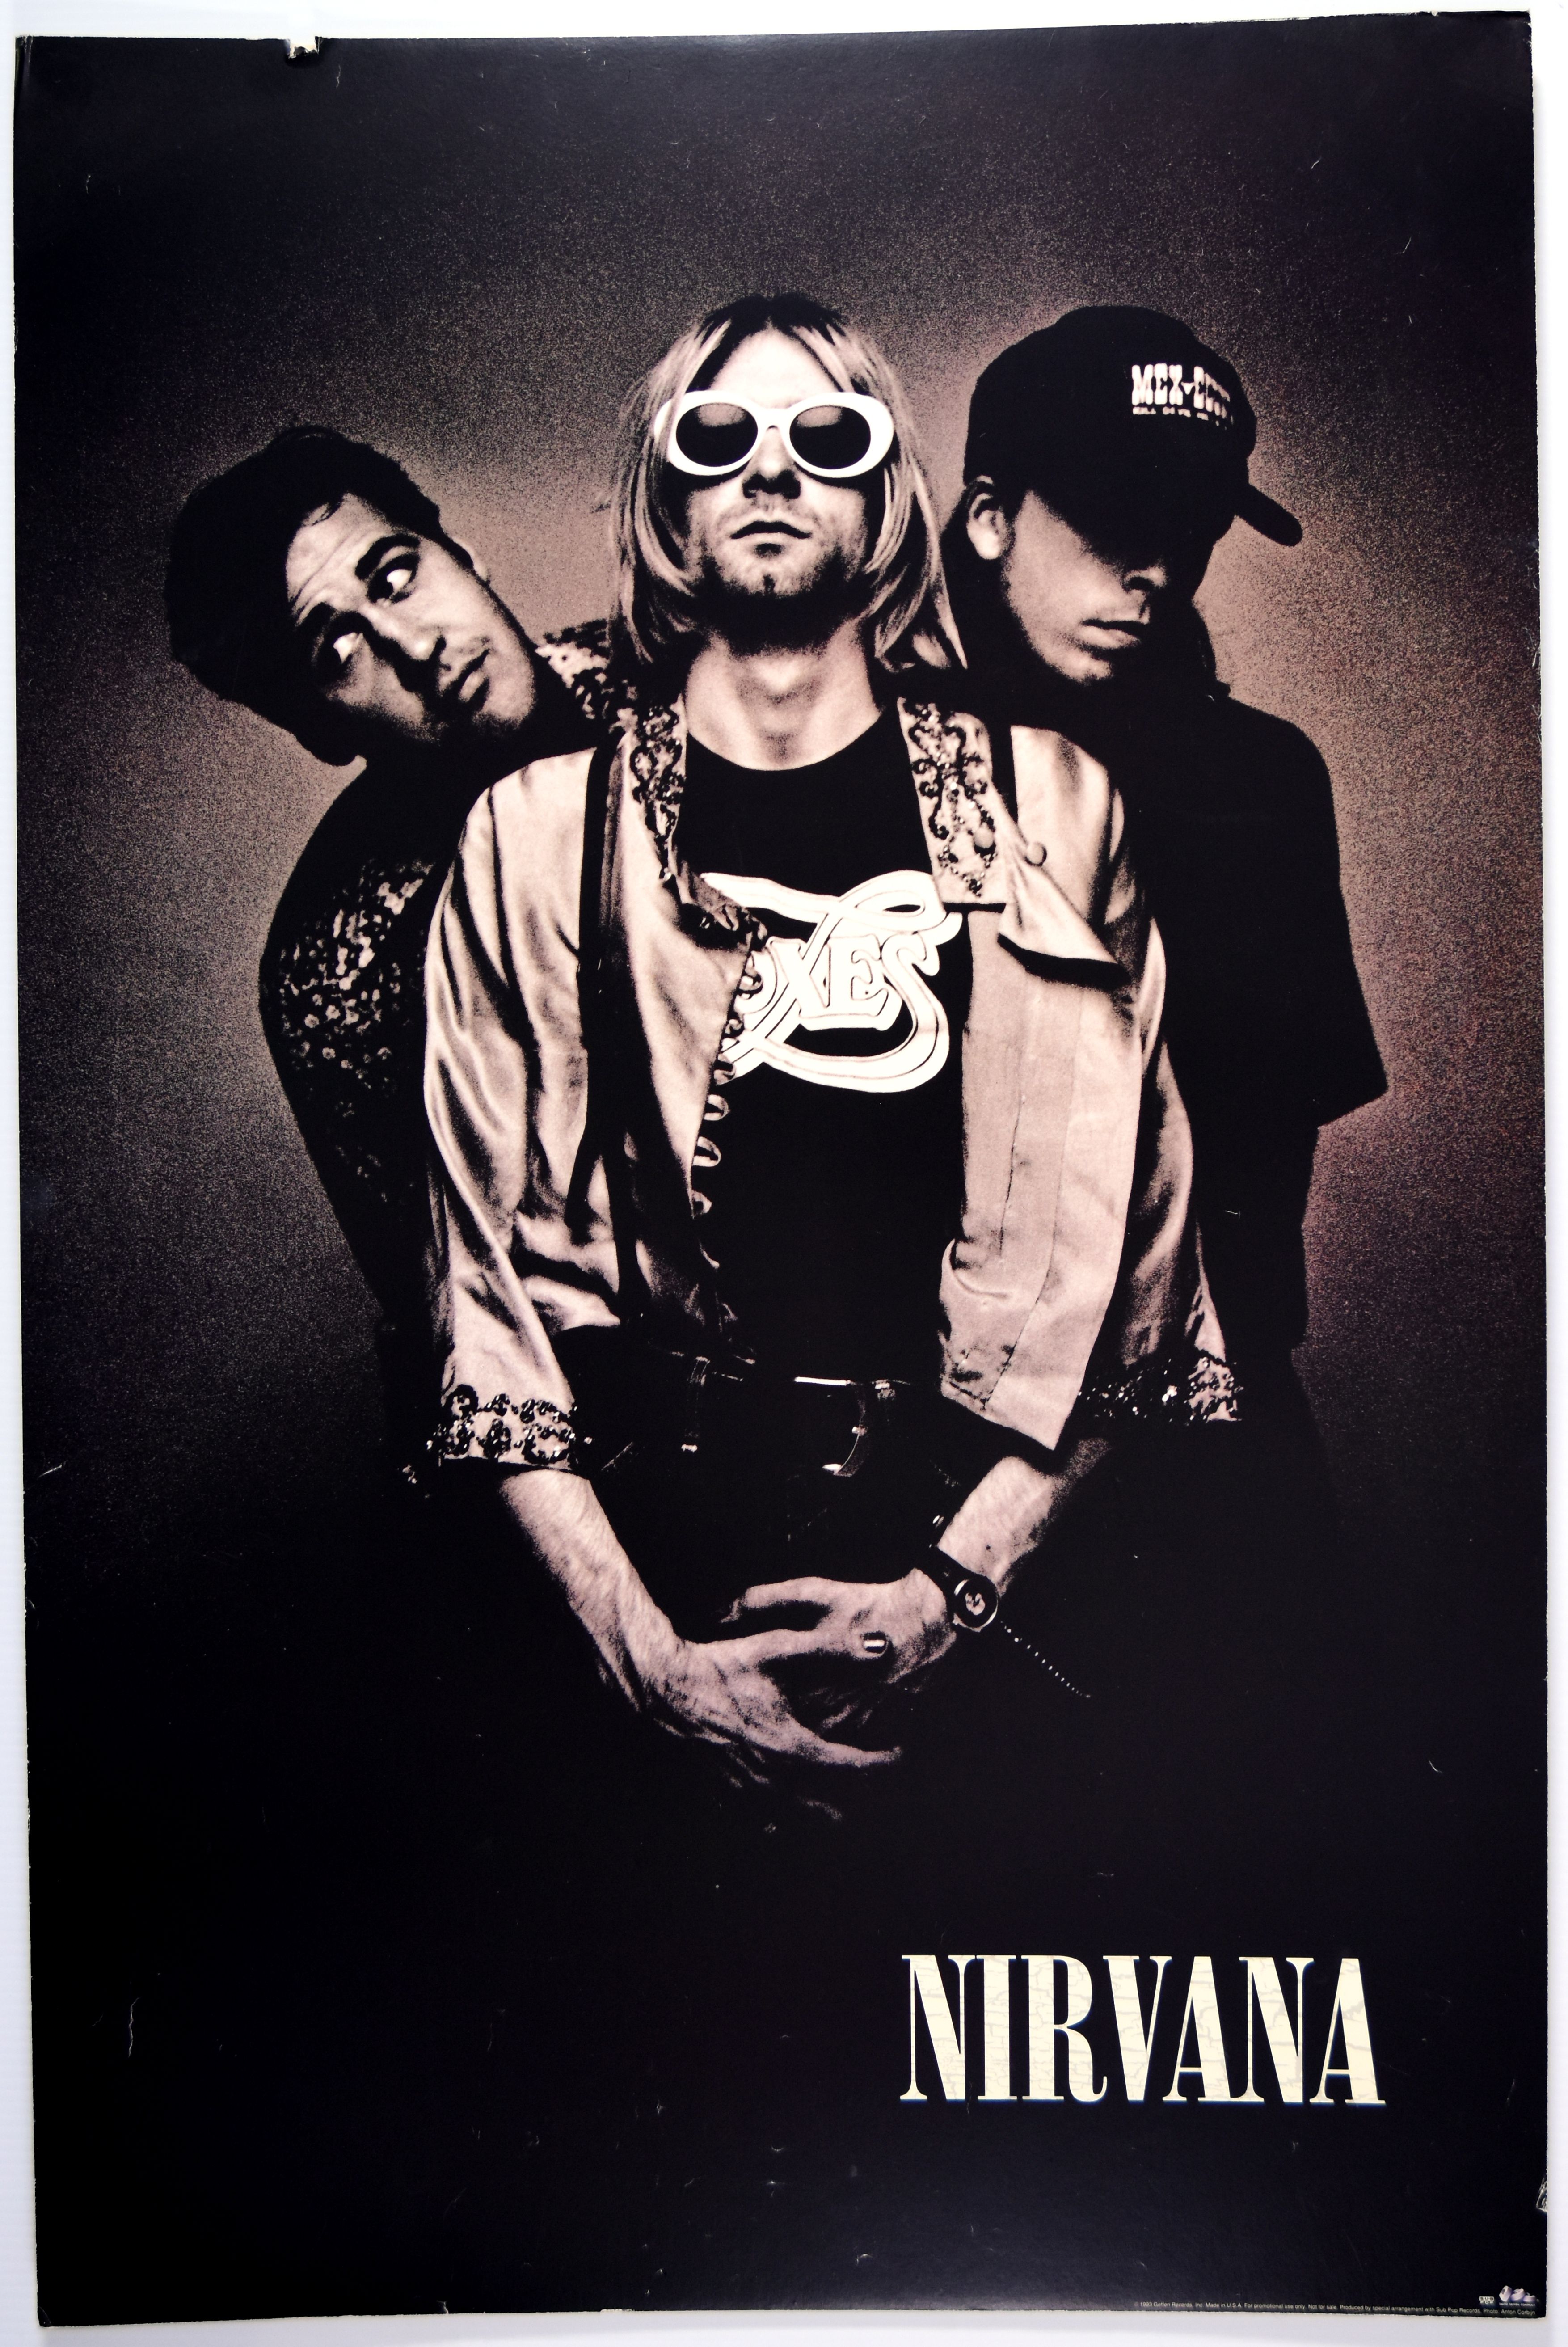 Nirvana Geffen Records Promotional Band Poster 1993 Concert Poster